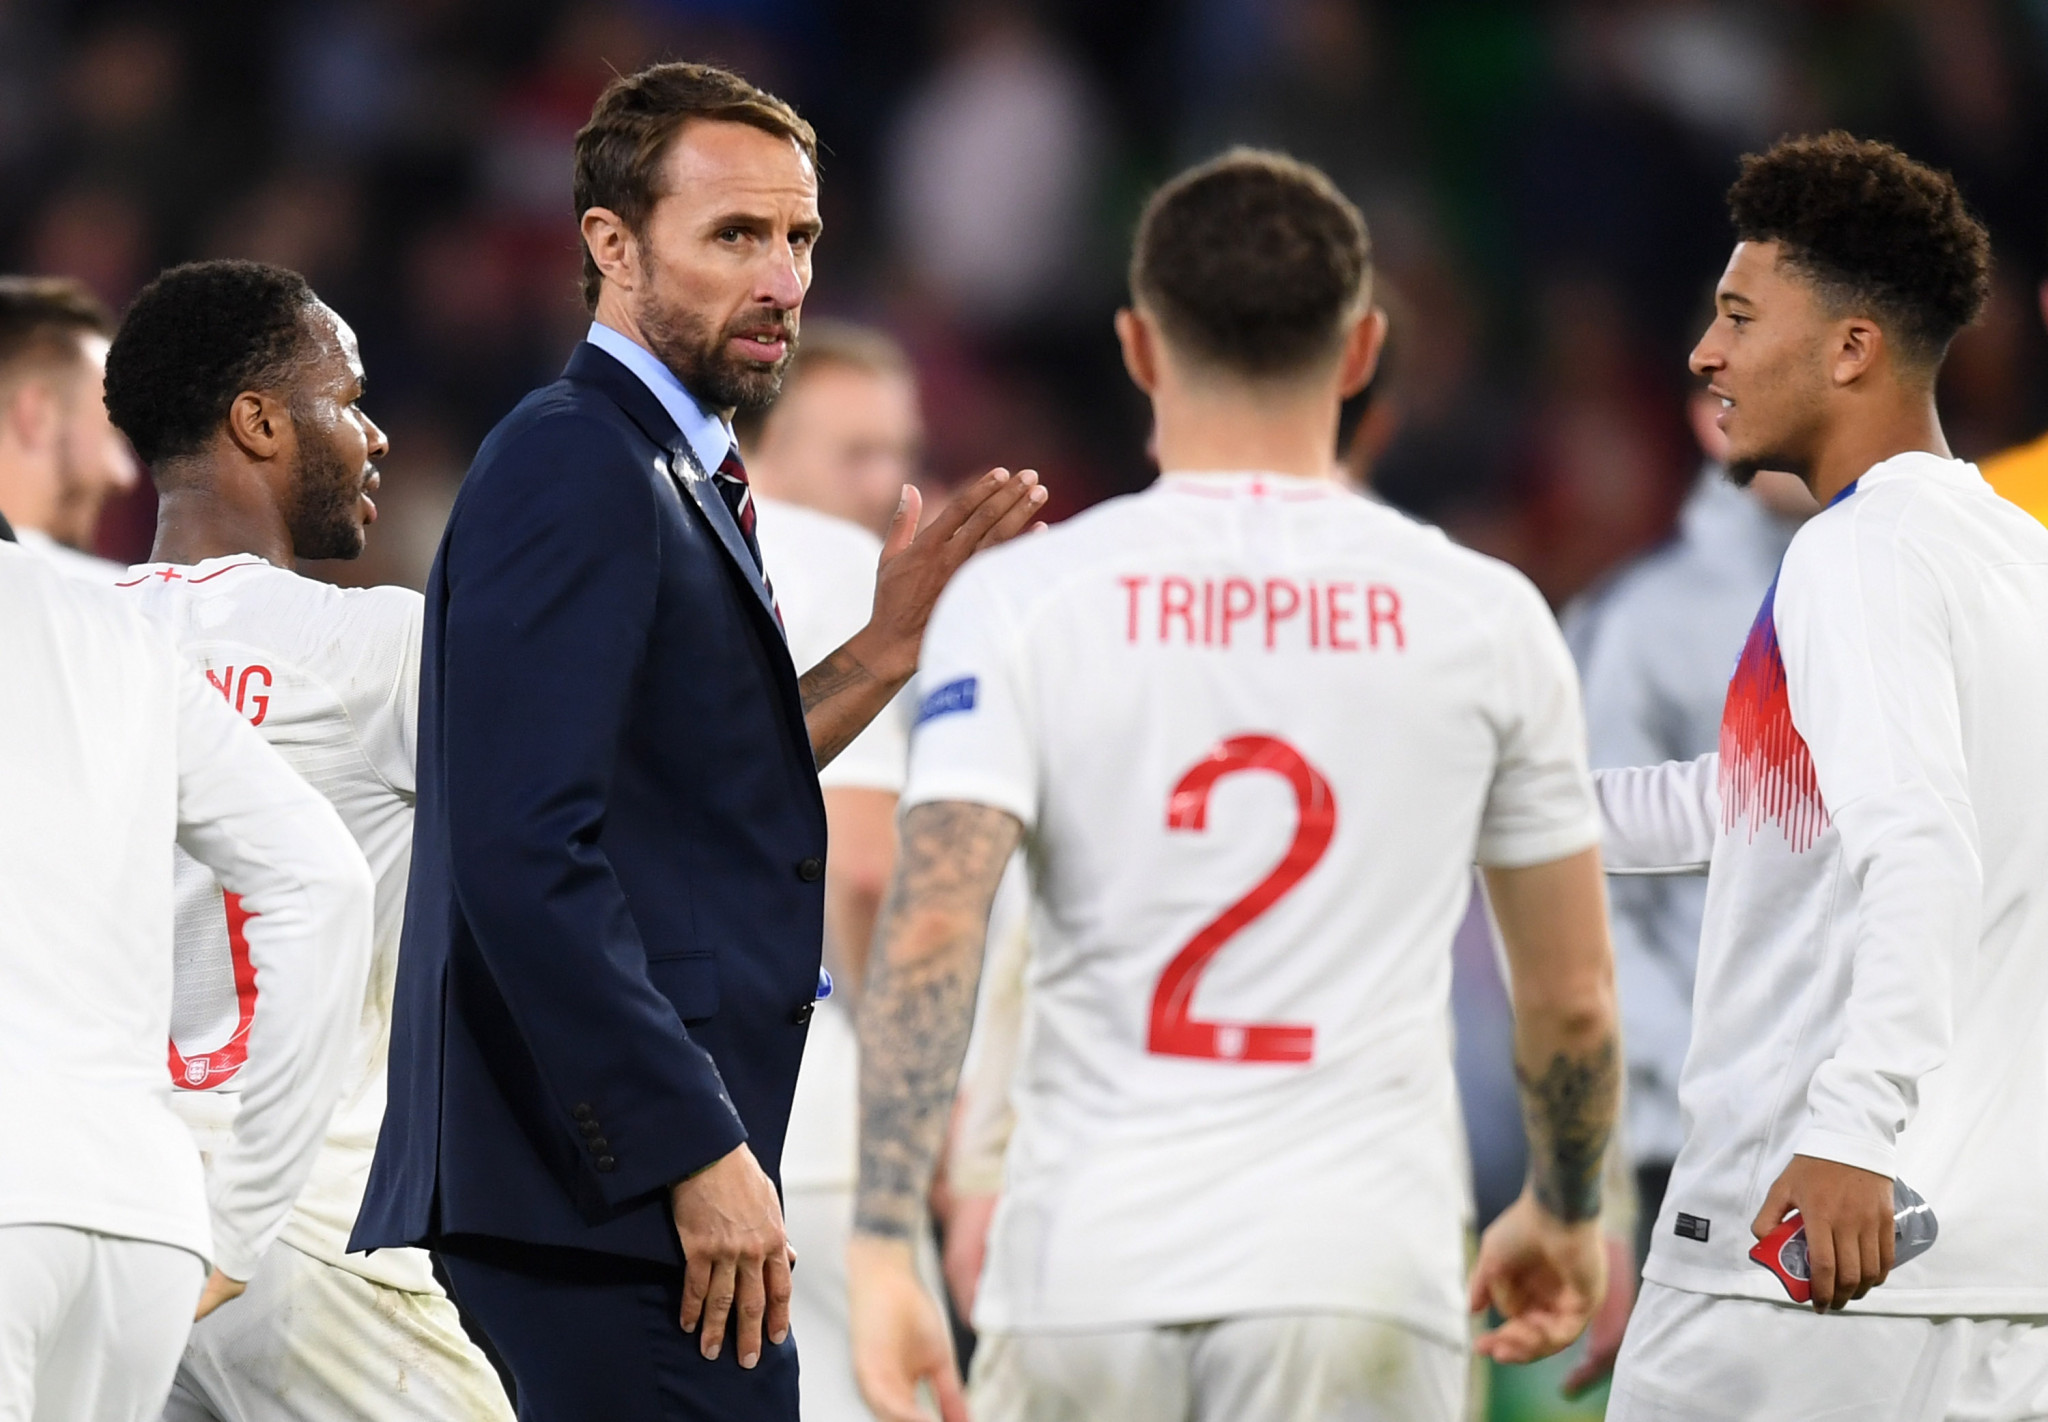 Gareth Southgate's England play Croatia in Group A4 this afternoon knowing the winner will advance into the semi-finals ©Getty Images